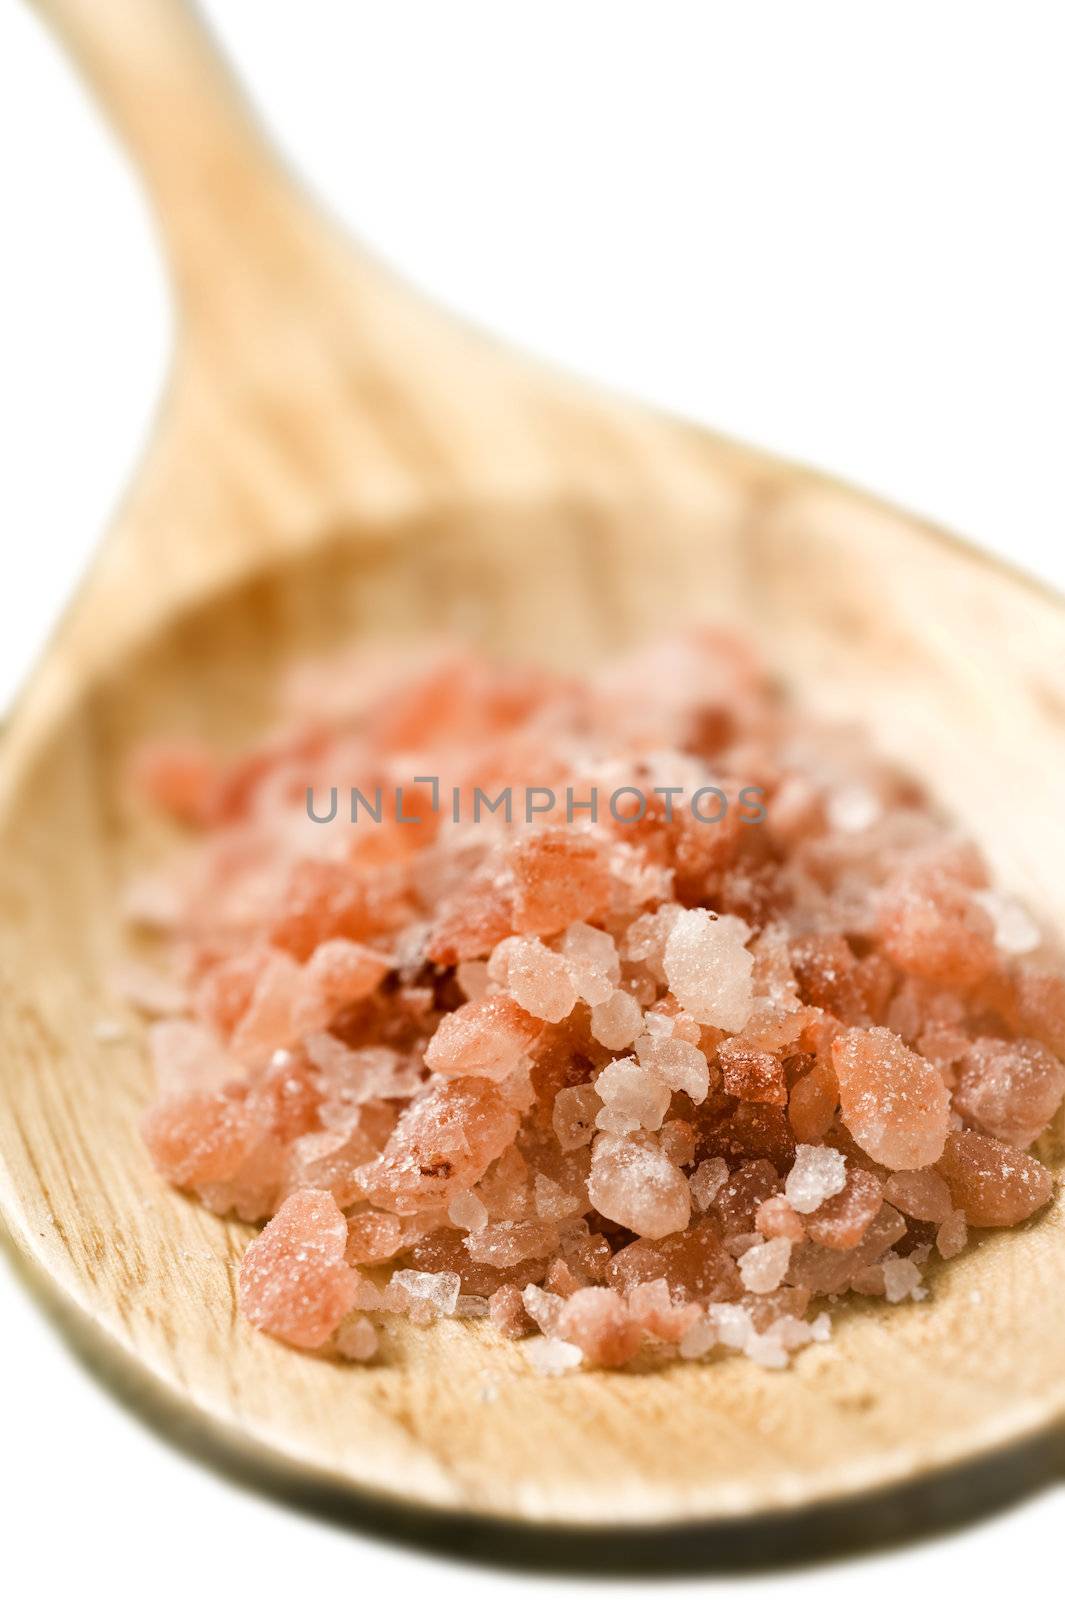 Pure himalayan salt on a wooden spoon by tish1